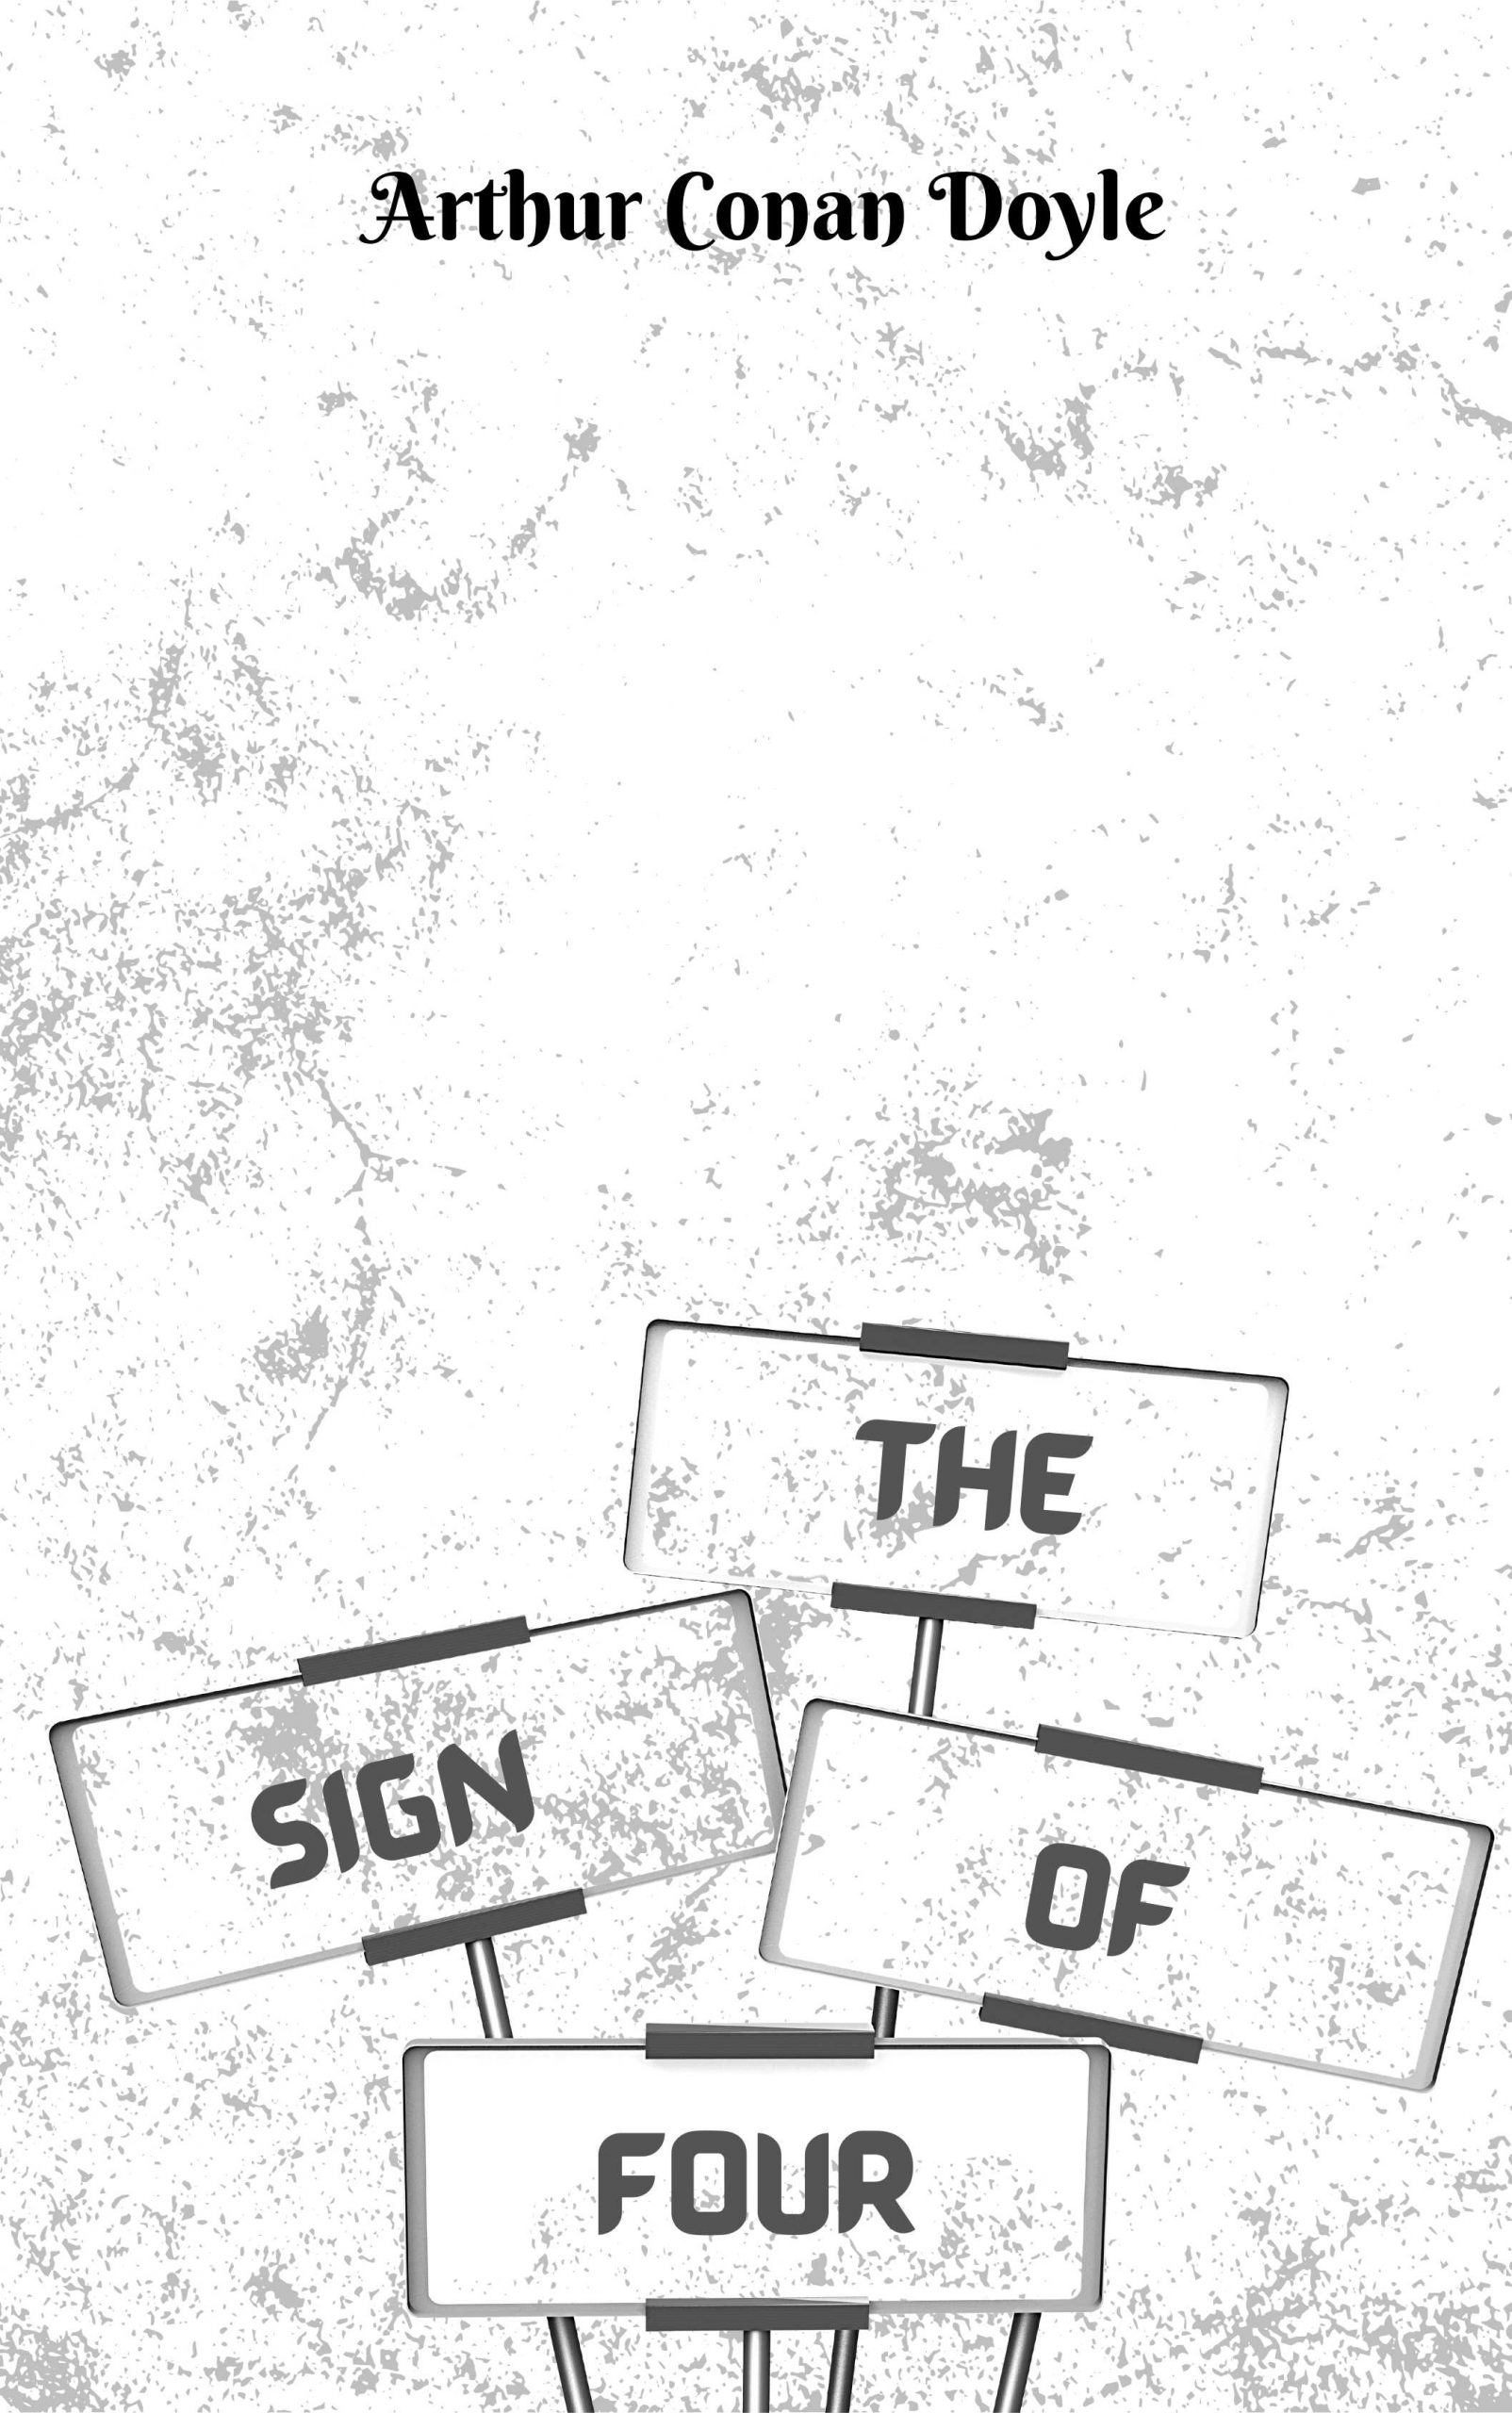 Cover image for The Sign of the Four by Arthur Conan Doyle